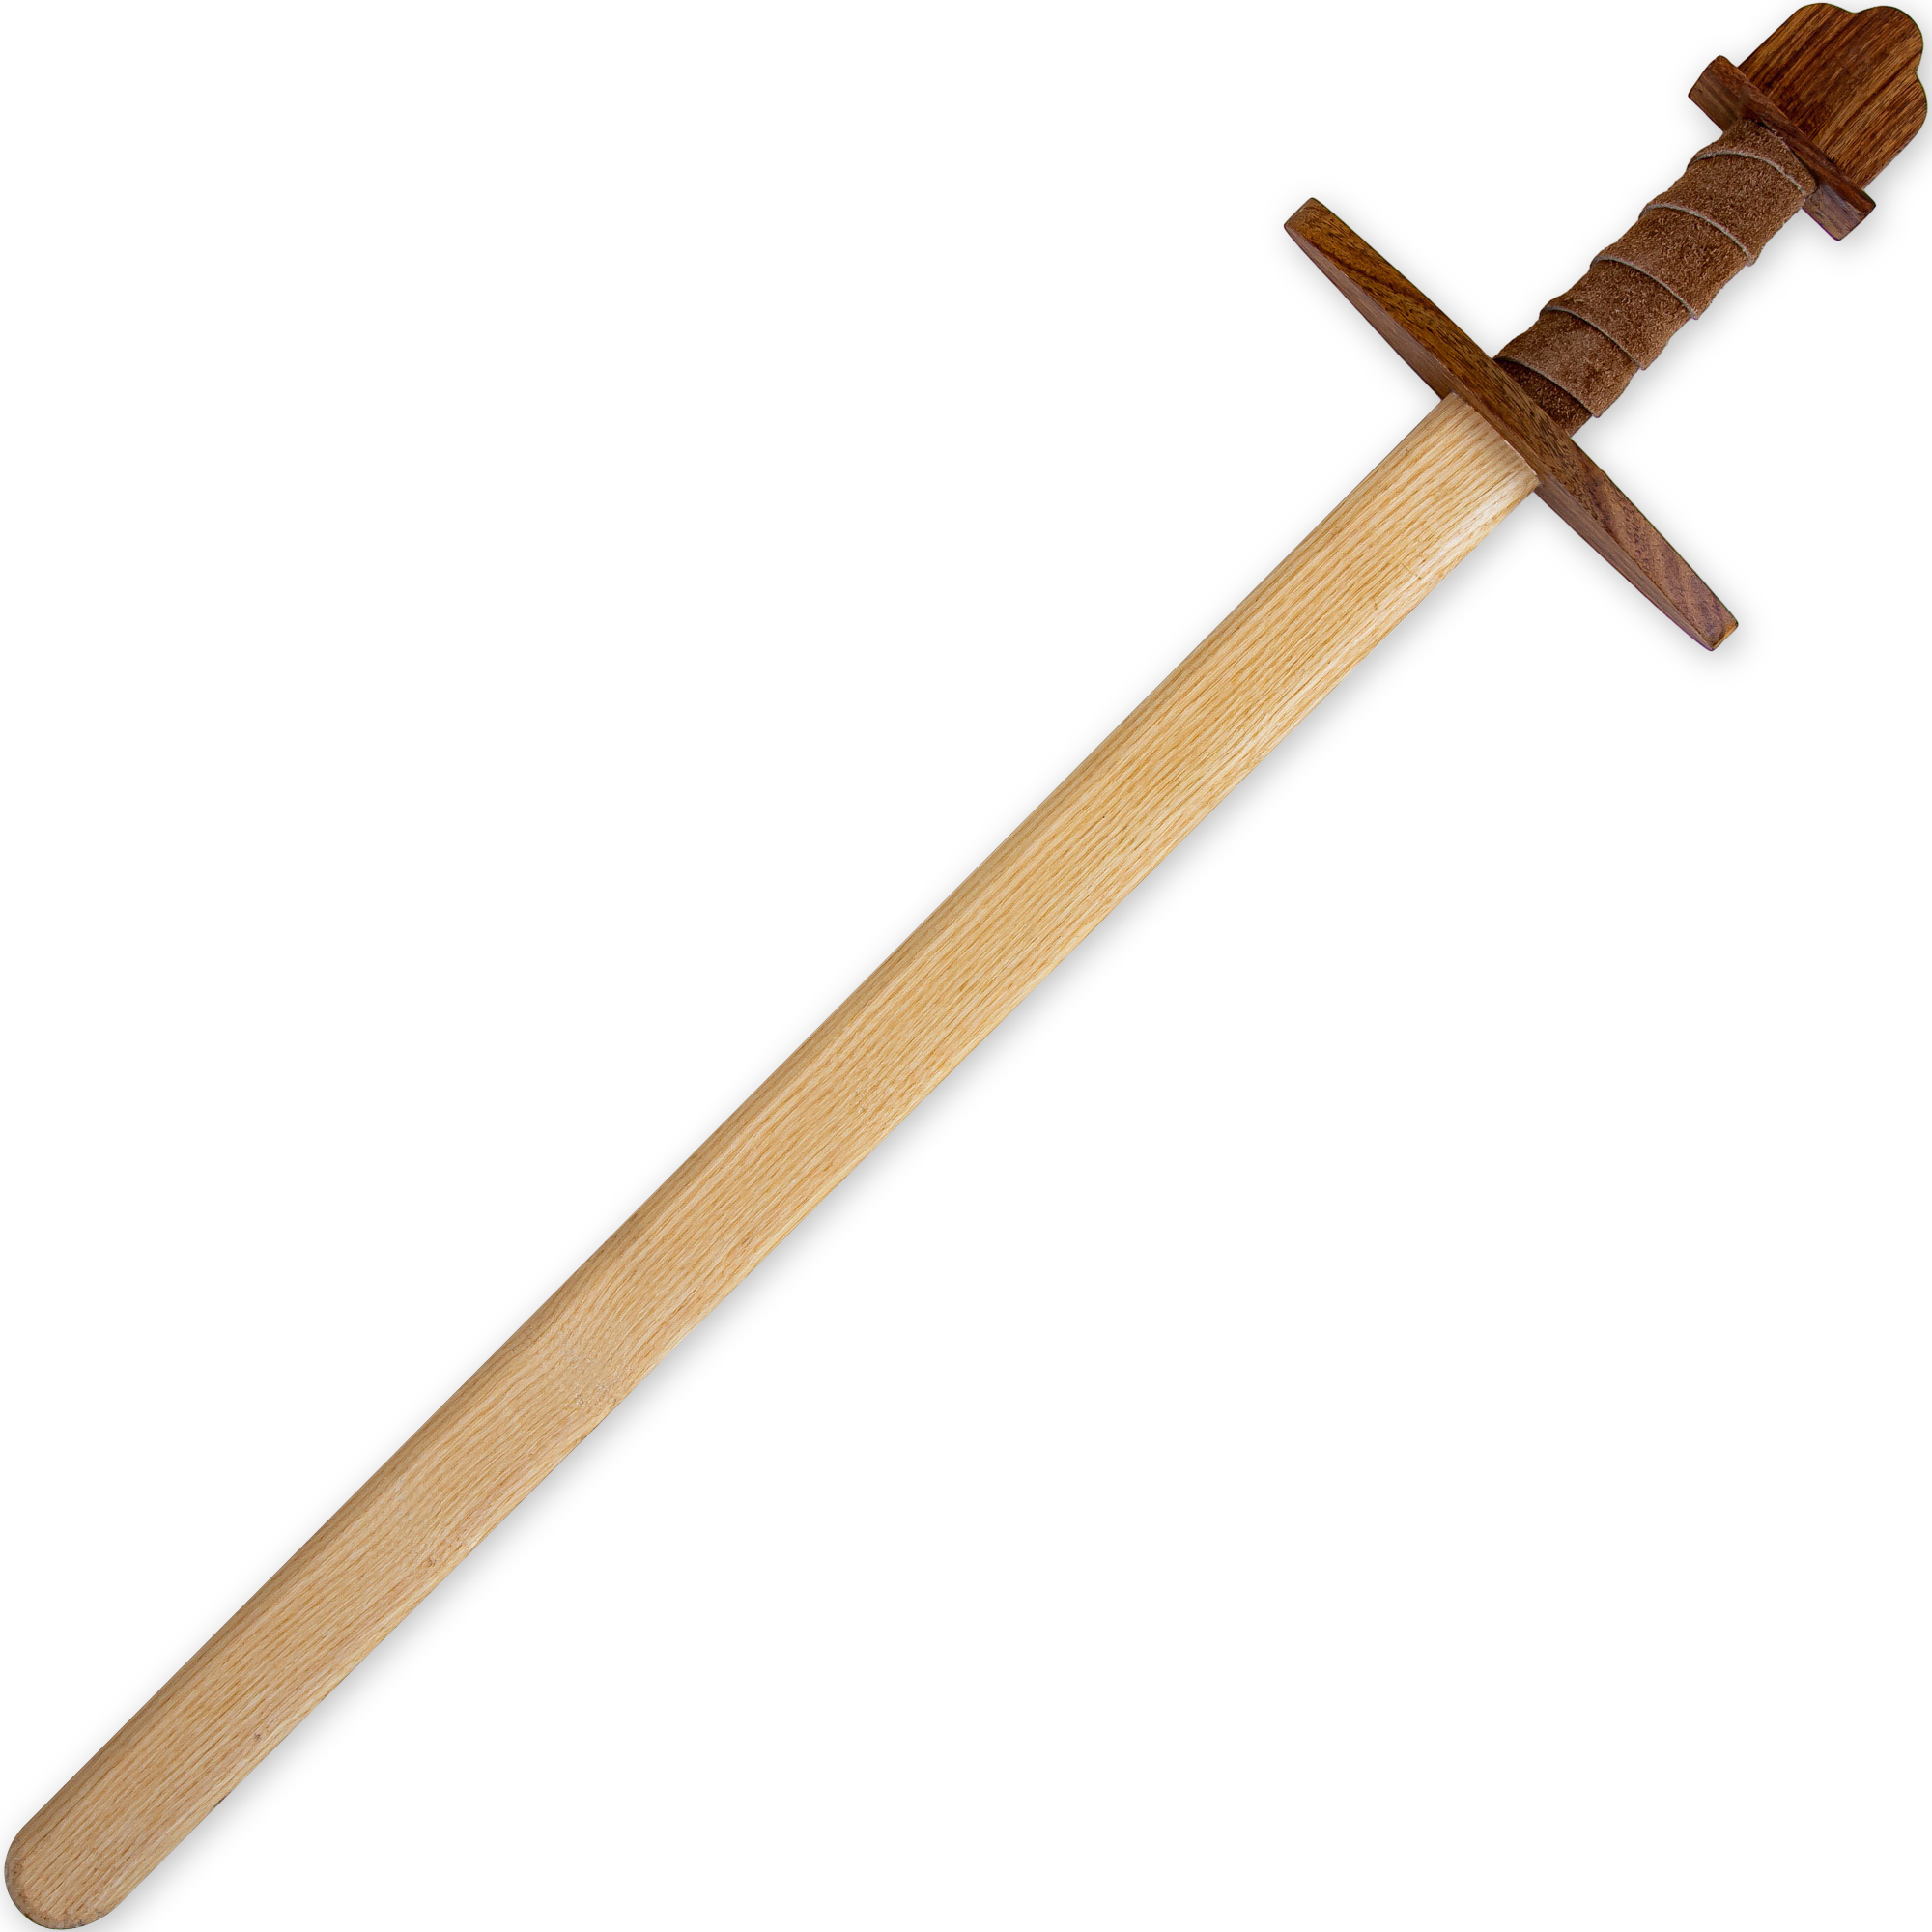 Wooden Replica Viking Practice SWORD | Steamed Beech Wood w/ Leather Wrapped Handle | Brown Leather